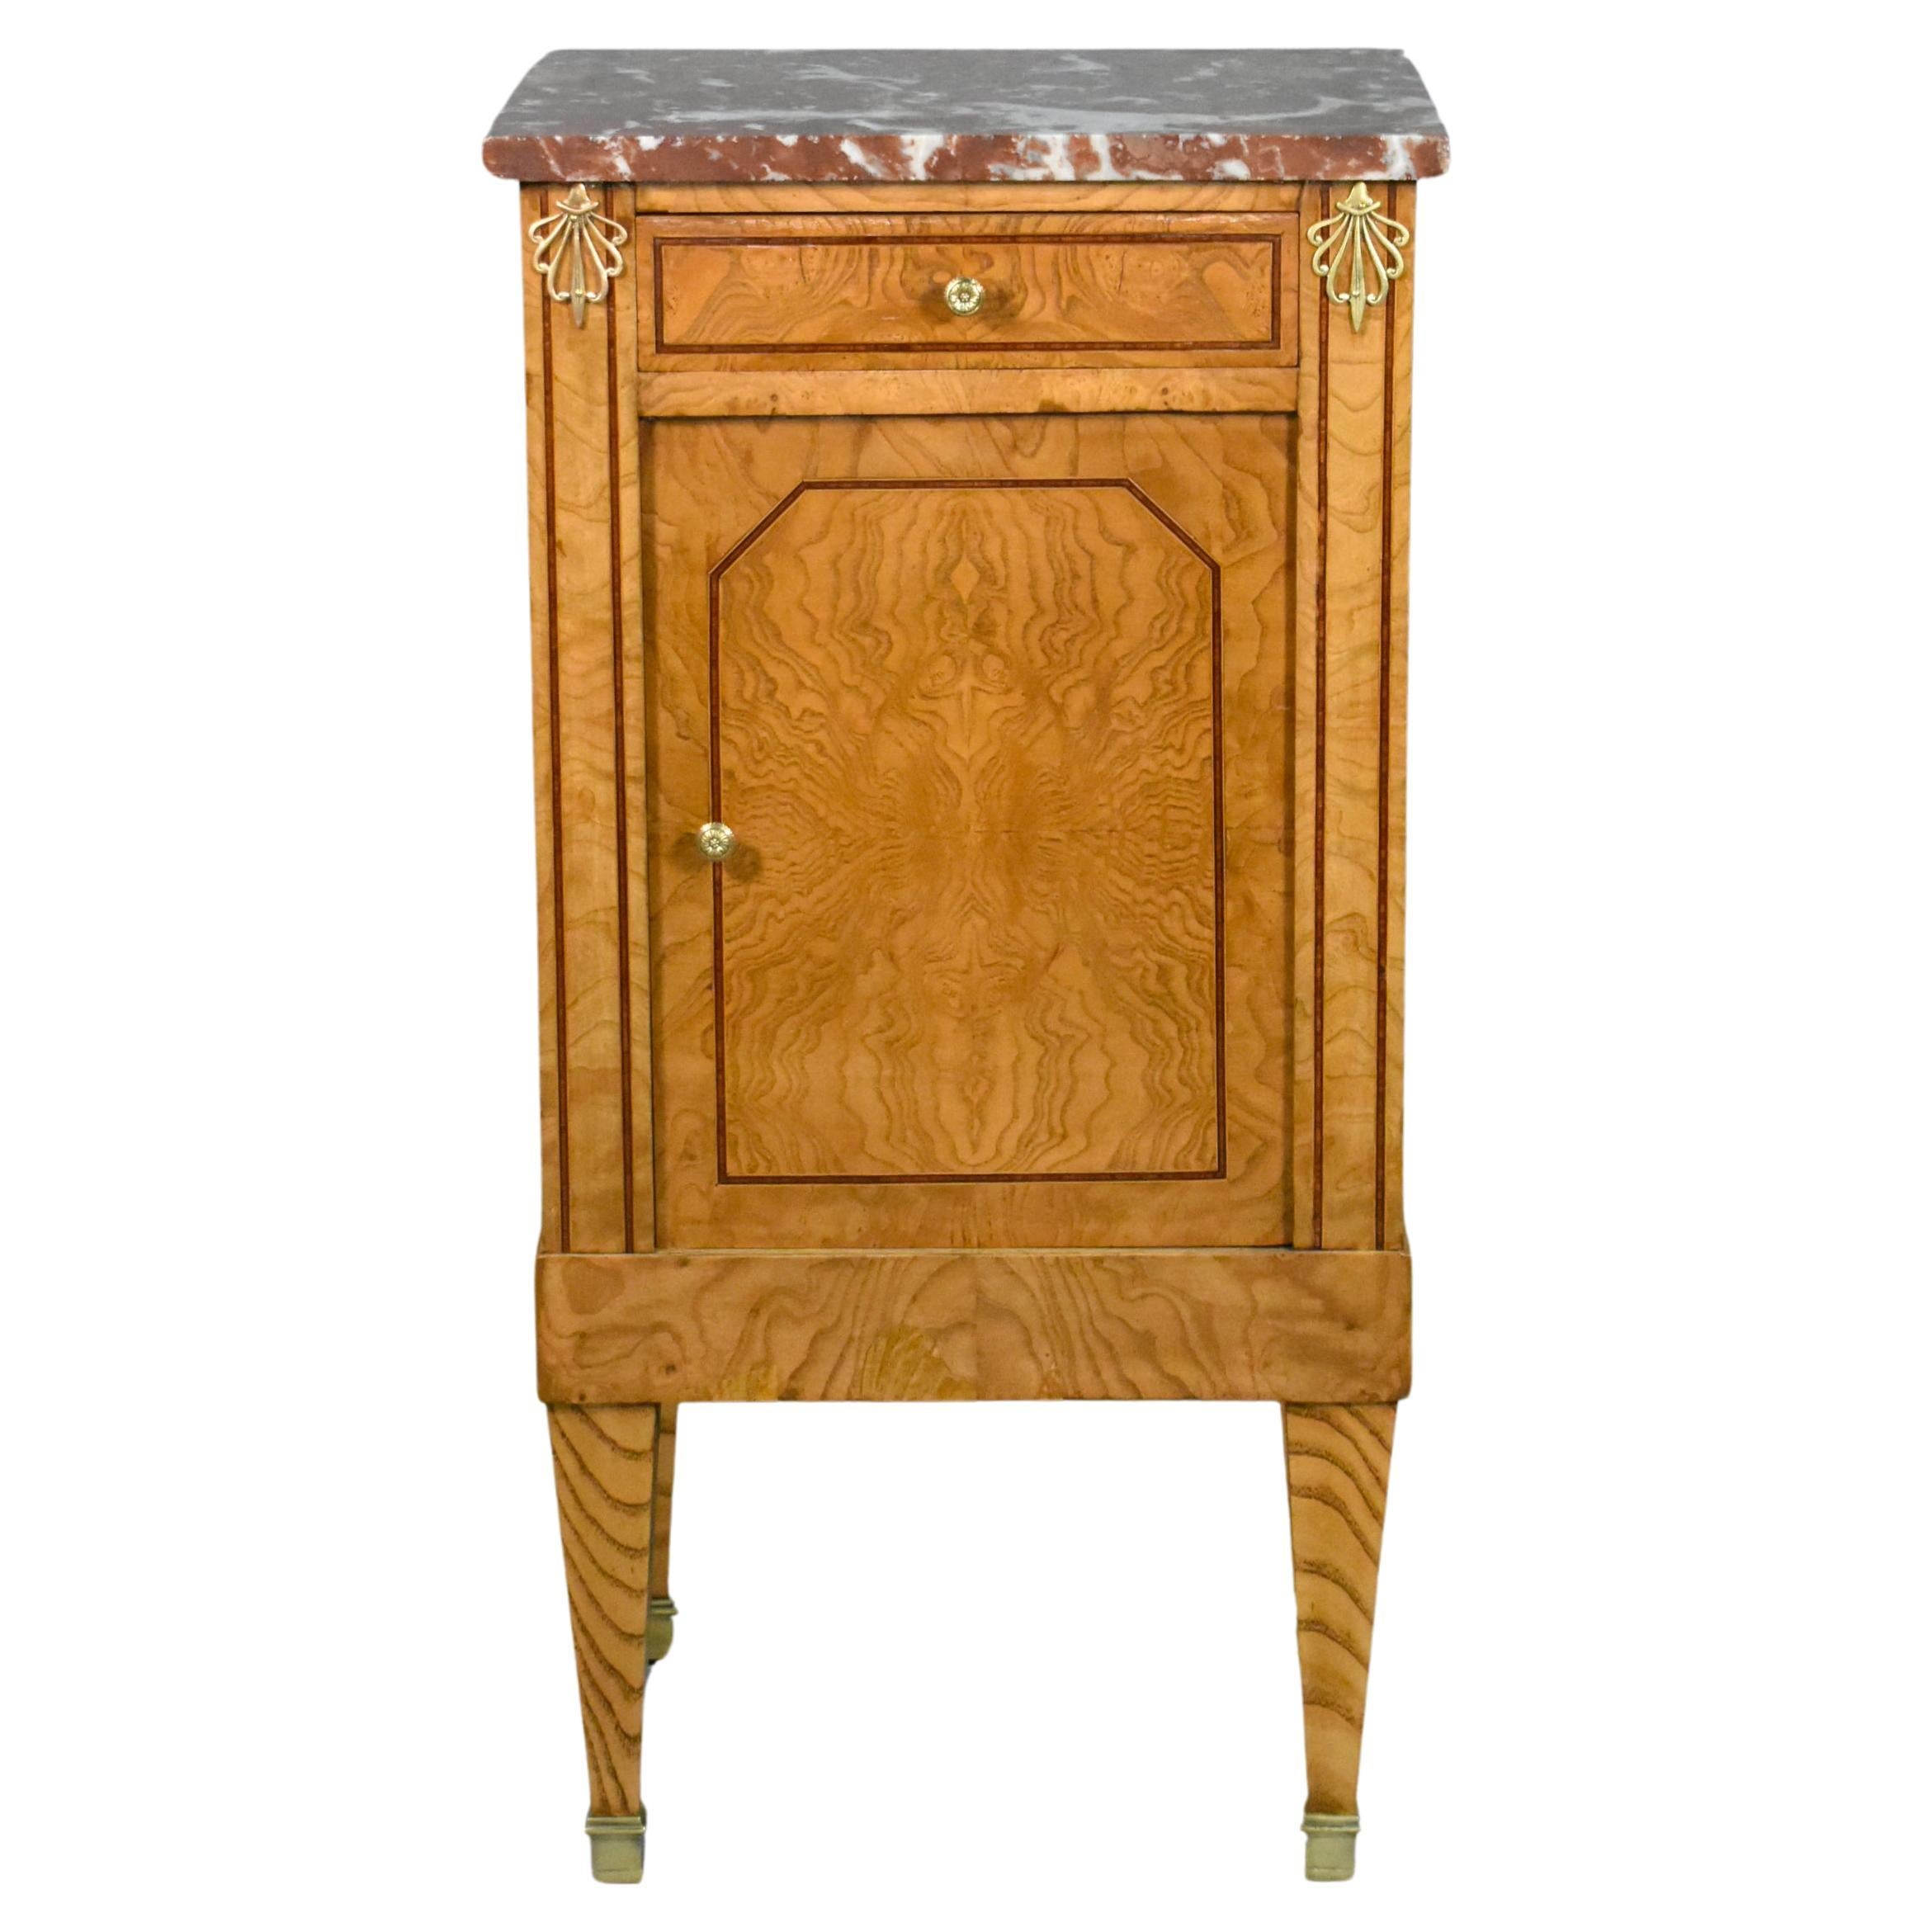 French Elm & Marble Cabinet Louis XVI Style